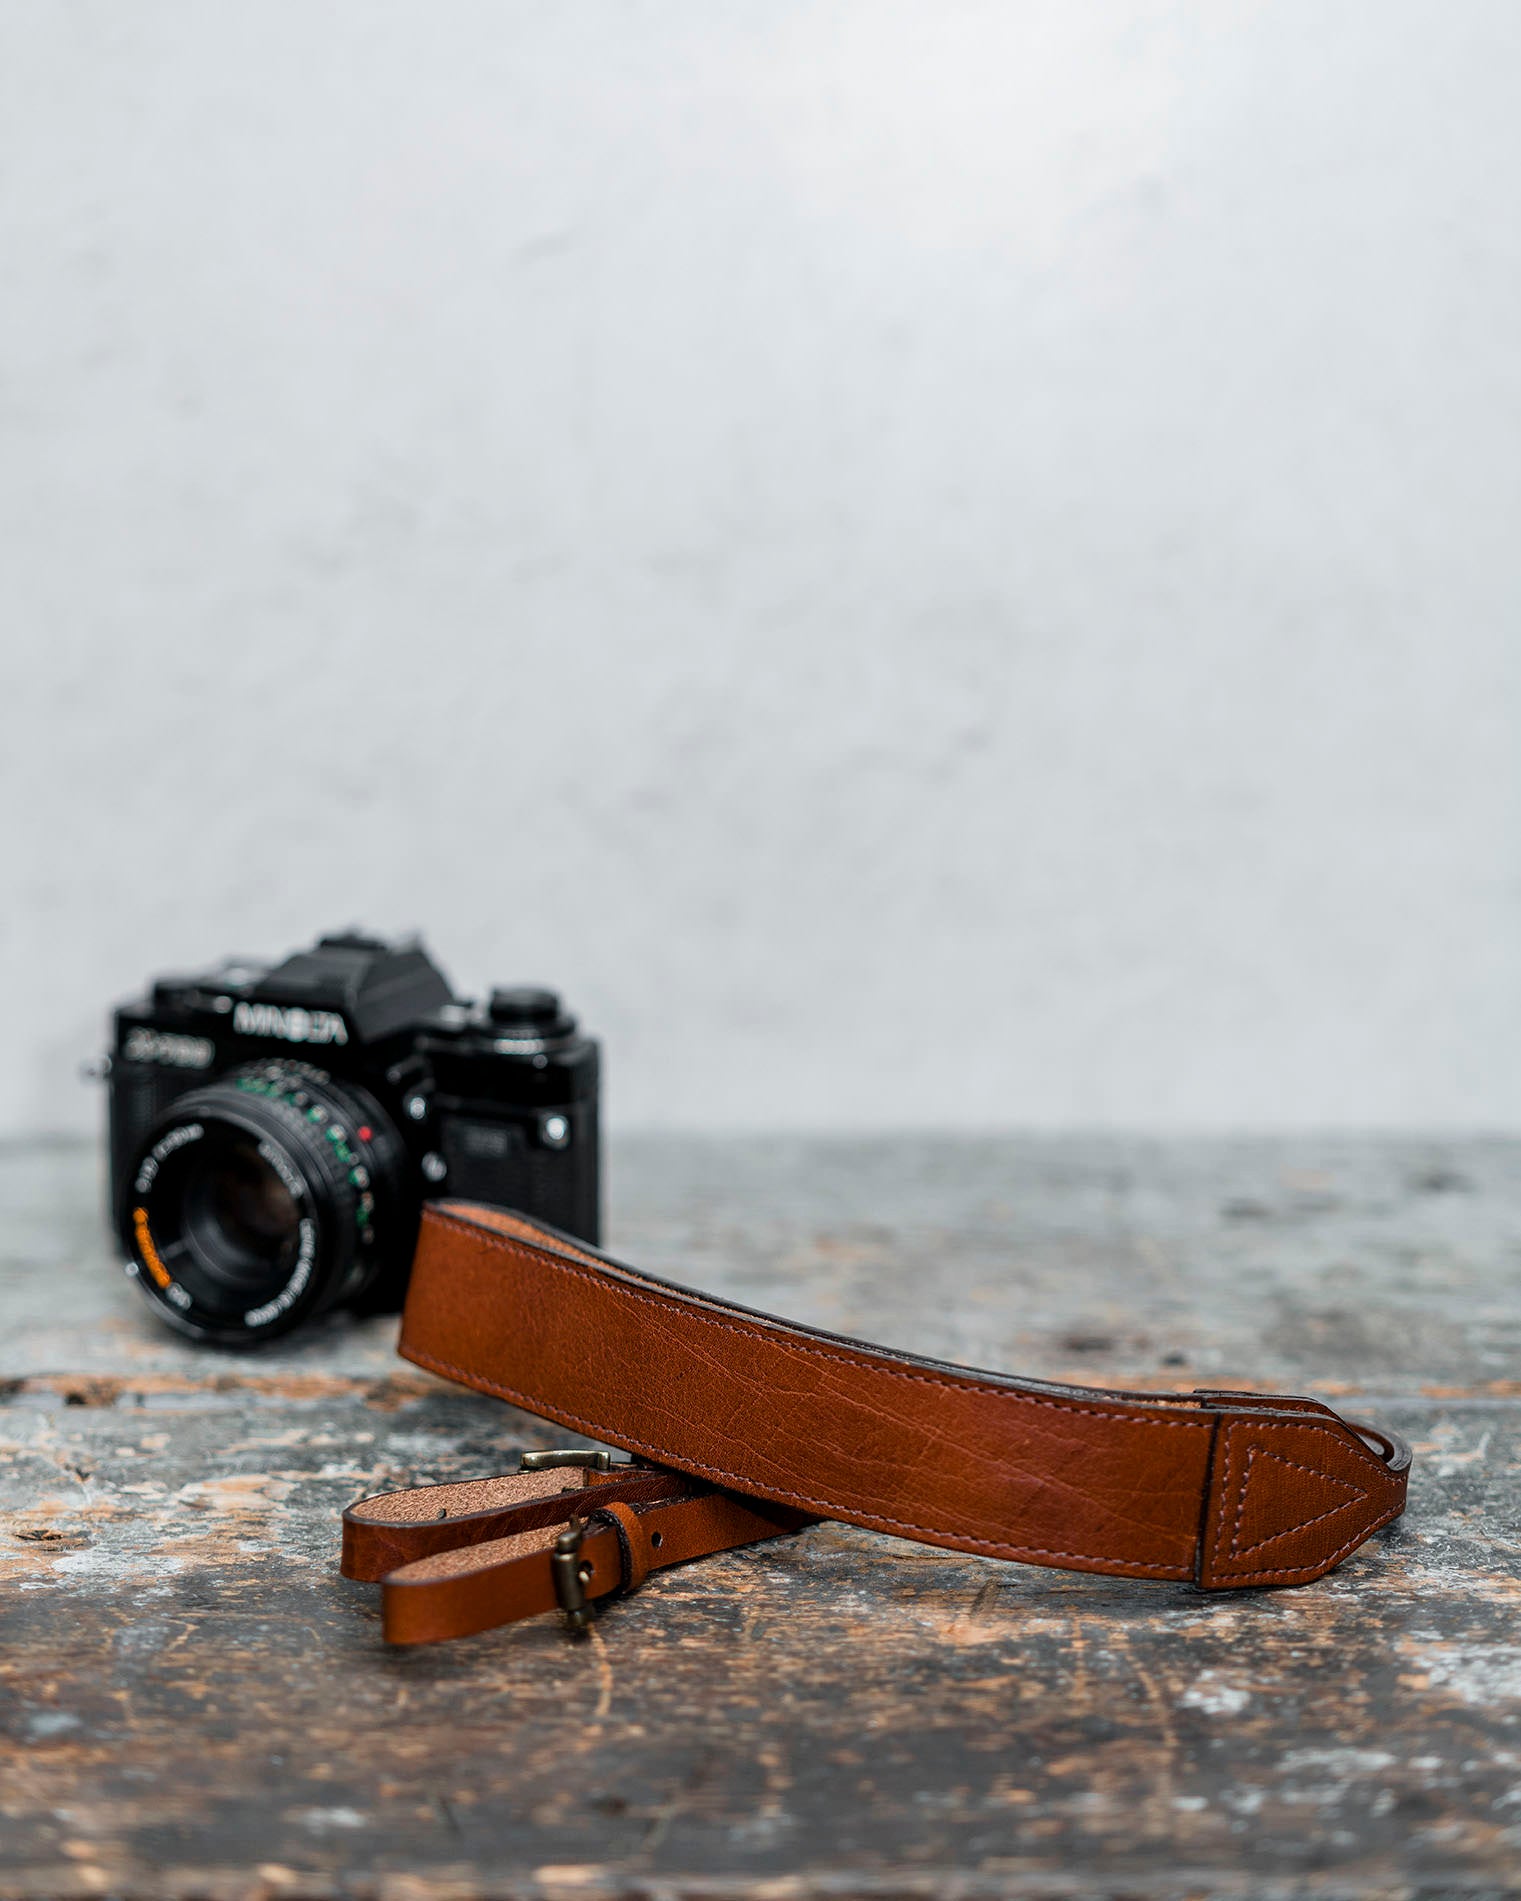 Leather camera strap on table with camera in background